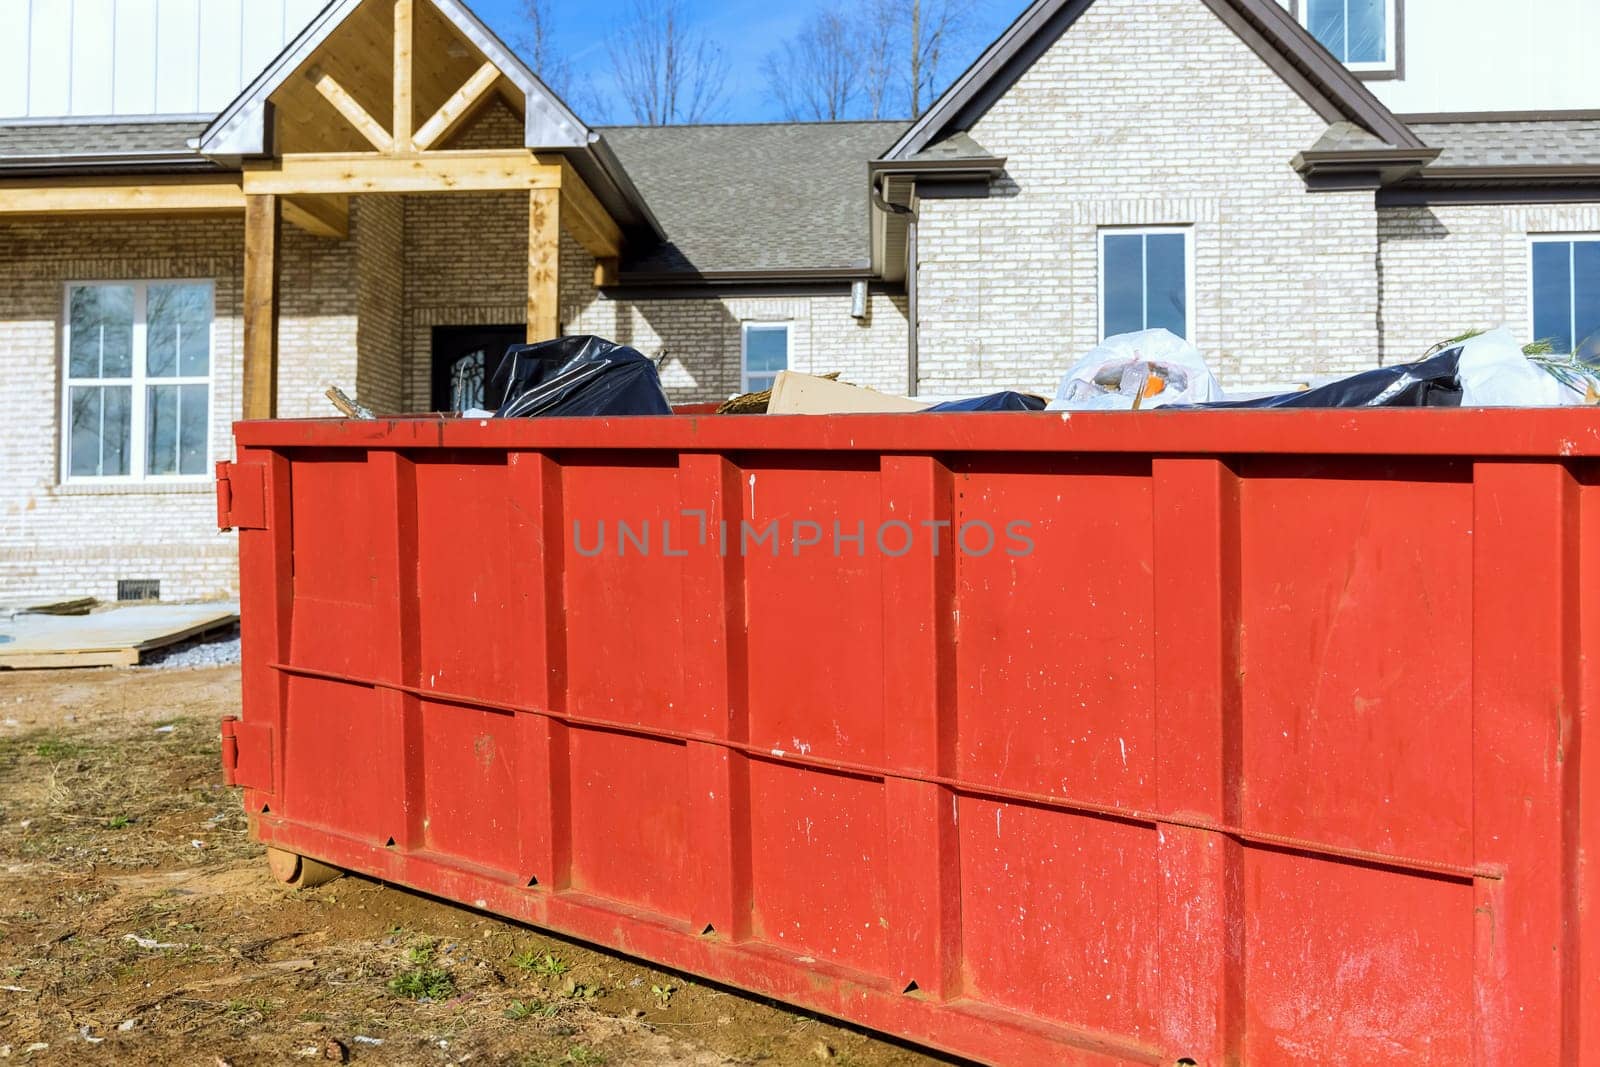 Container trash dumpster for construction waste recycling with care to environment